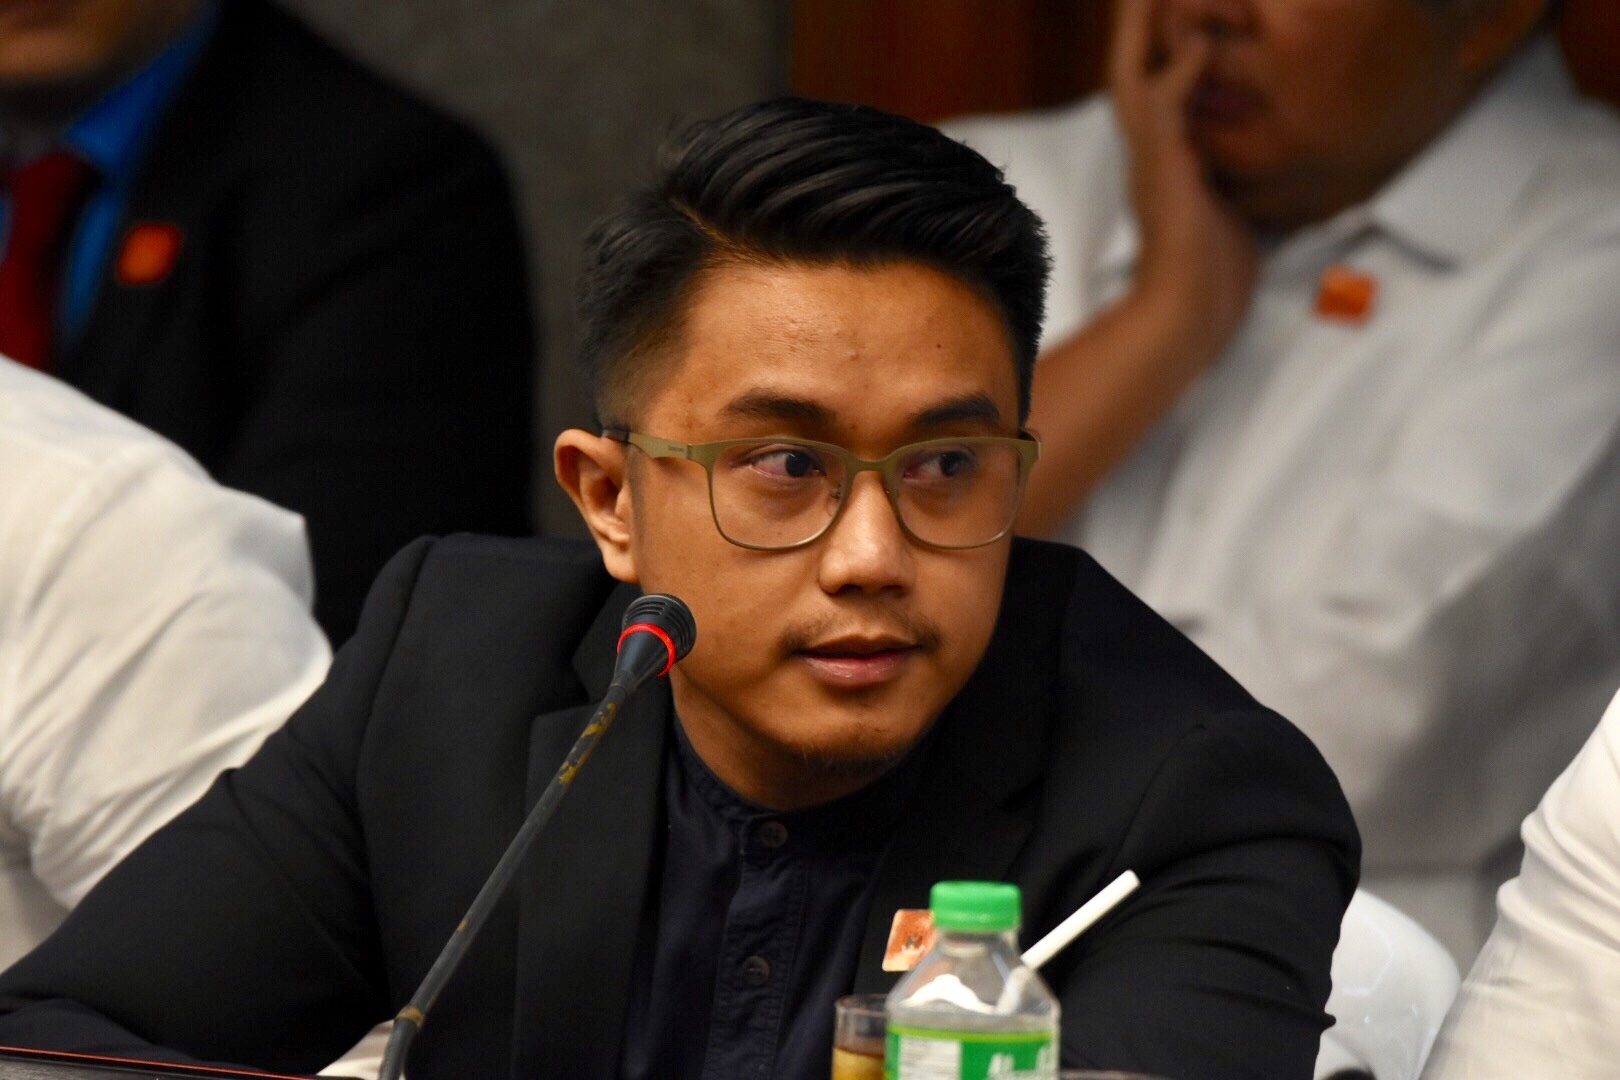 Lead fratman in Atio hazing: Prove there was abuse of superior strength